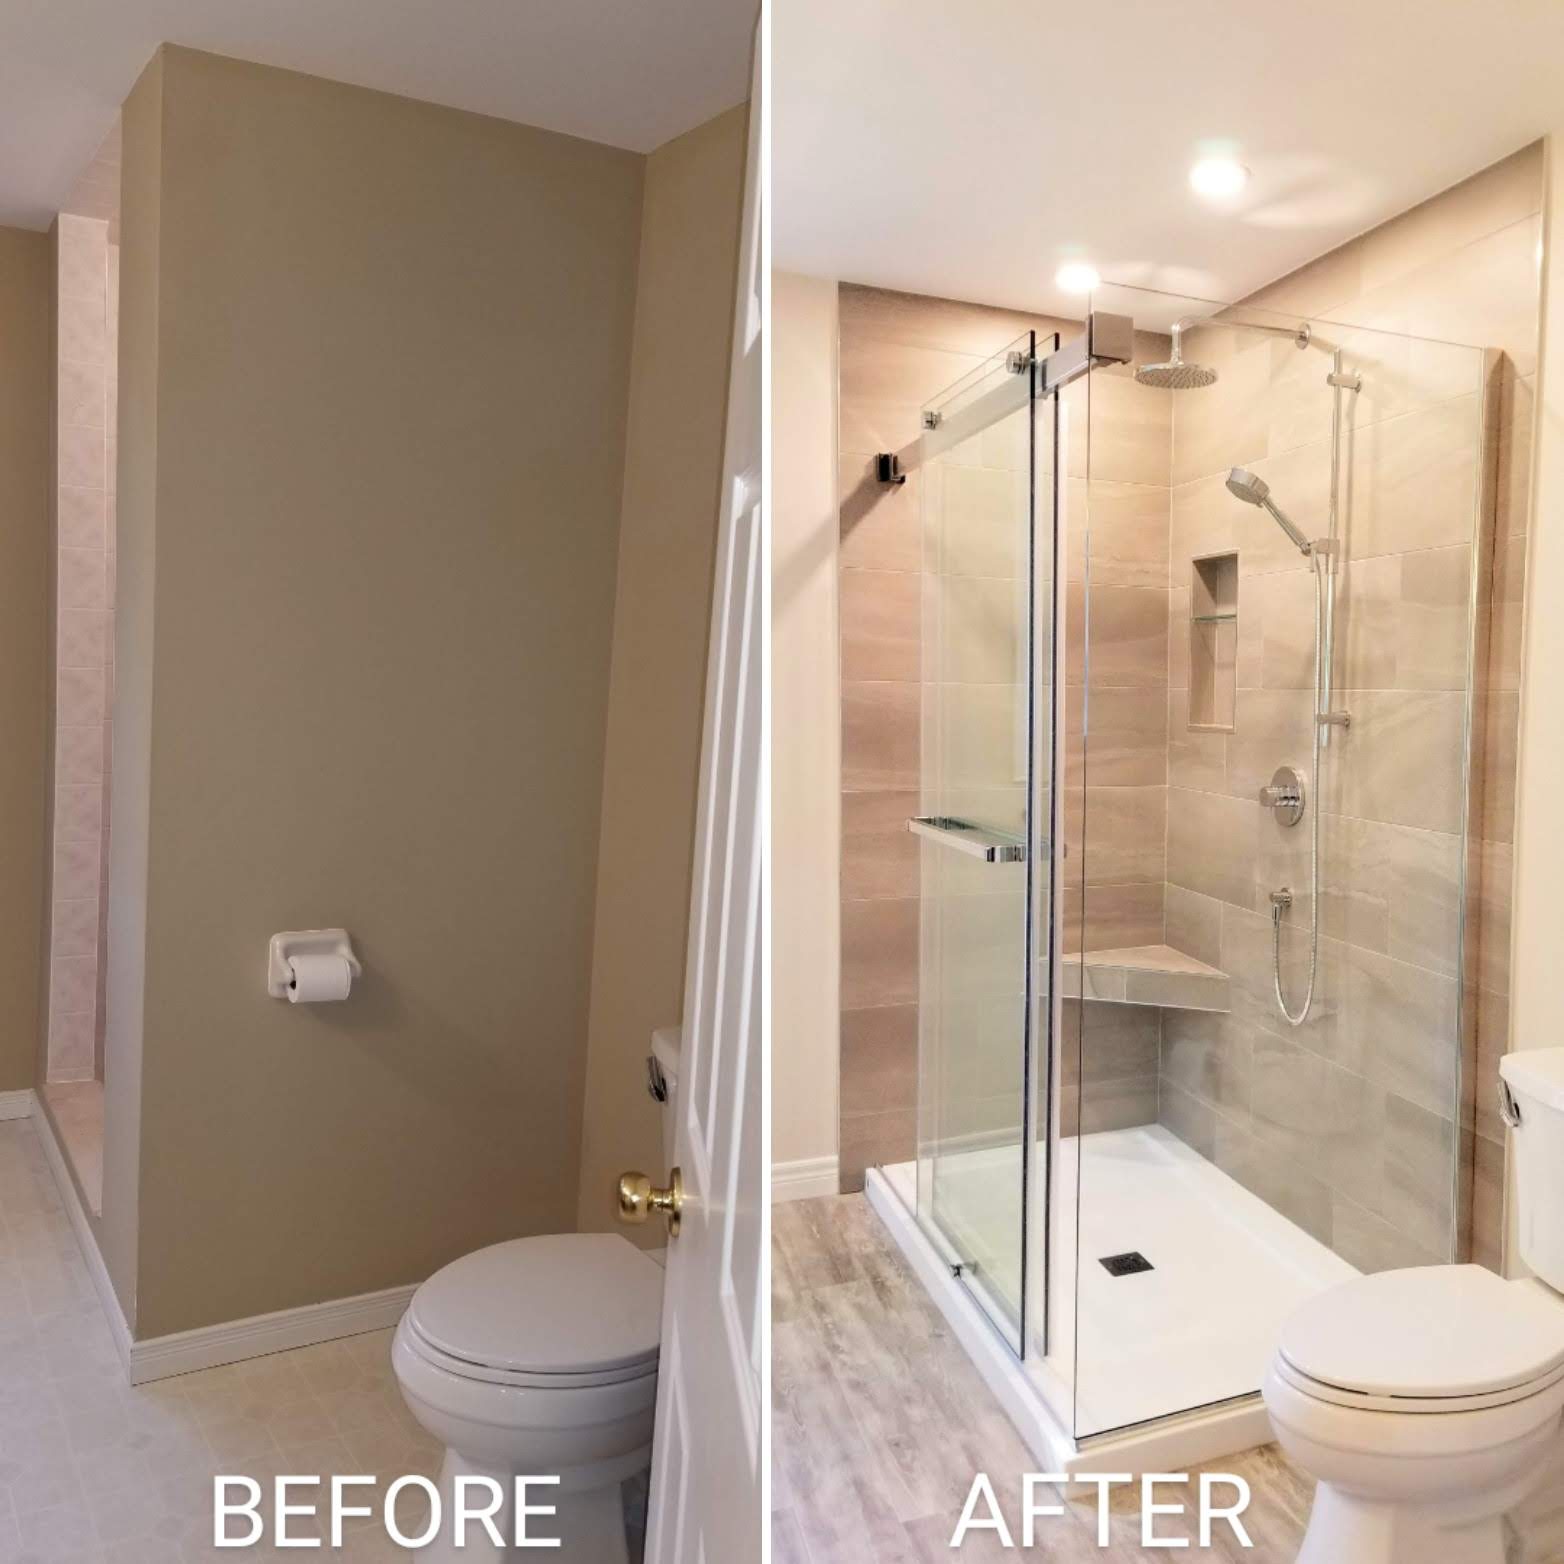 Before and after shower renovation by Germano Creative Interior Contracting Ltd.